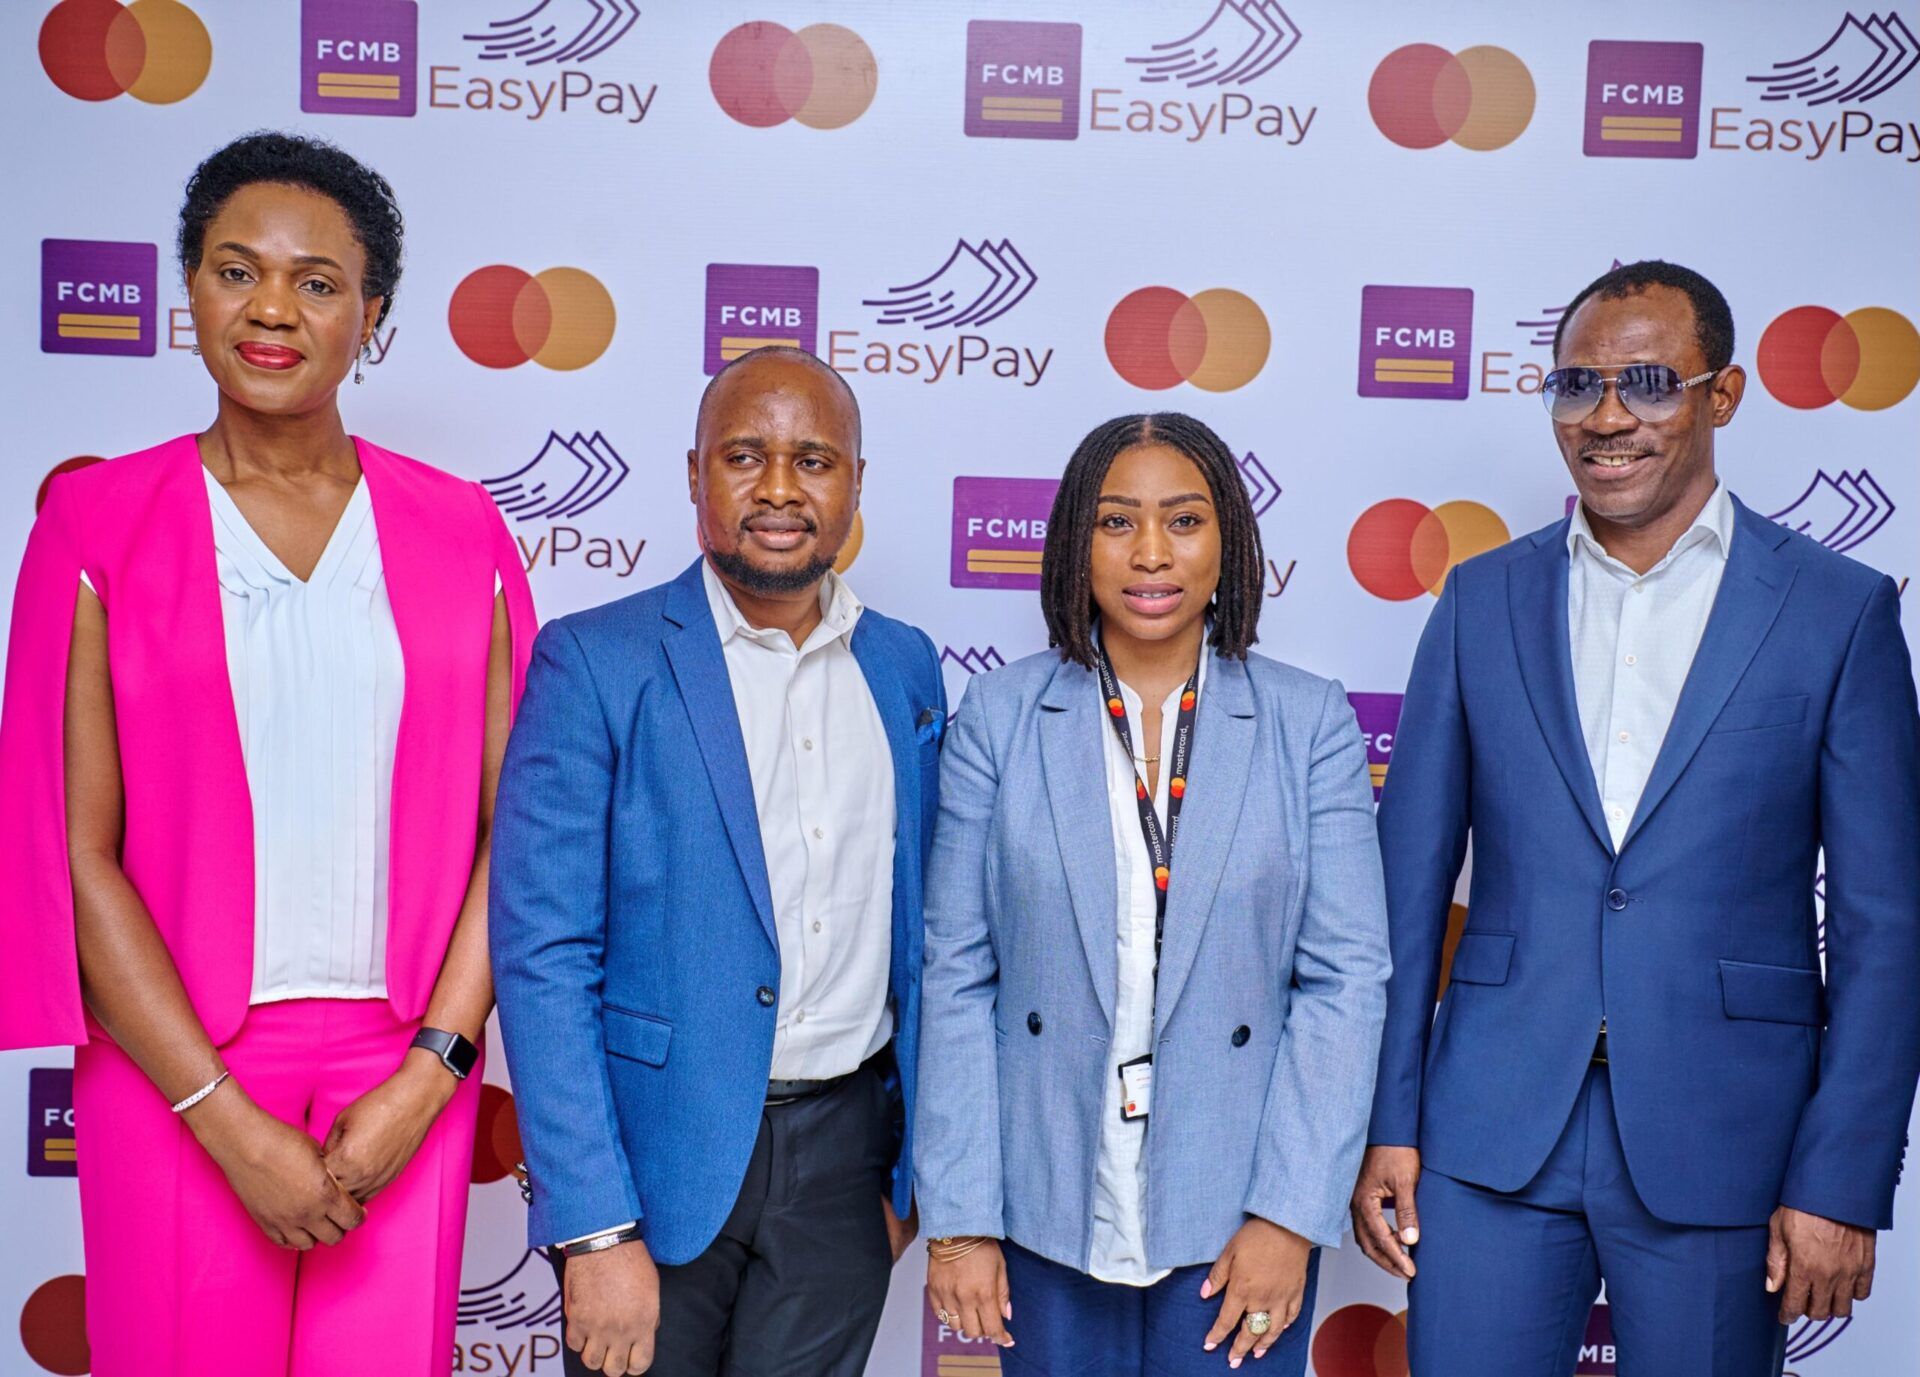 MasterCard Partners FCMB to Roll out Contactless Tap-on-Phone Payment Service in Nigeria